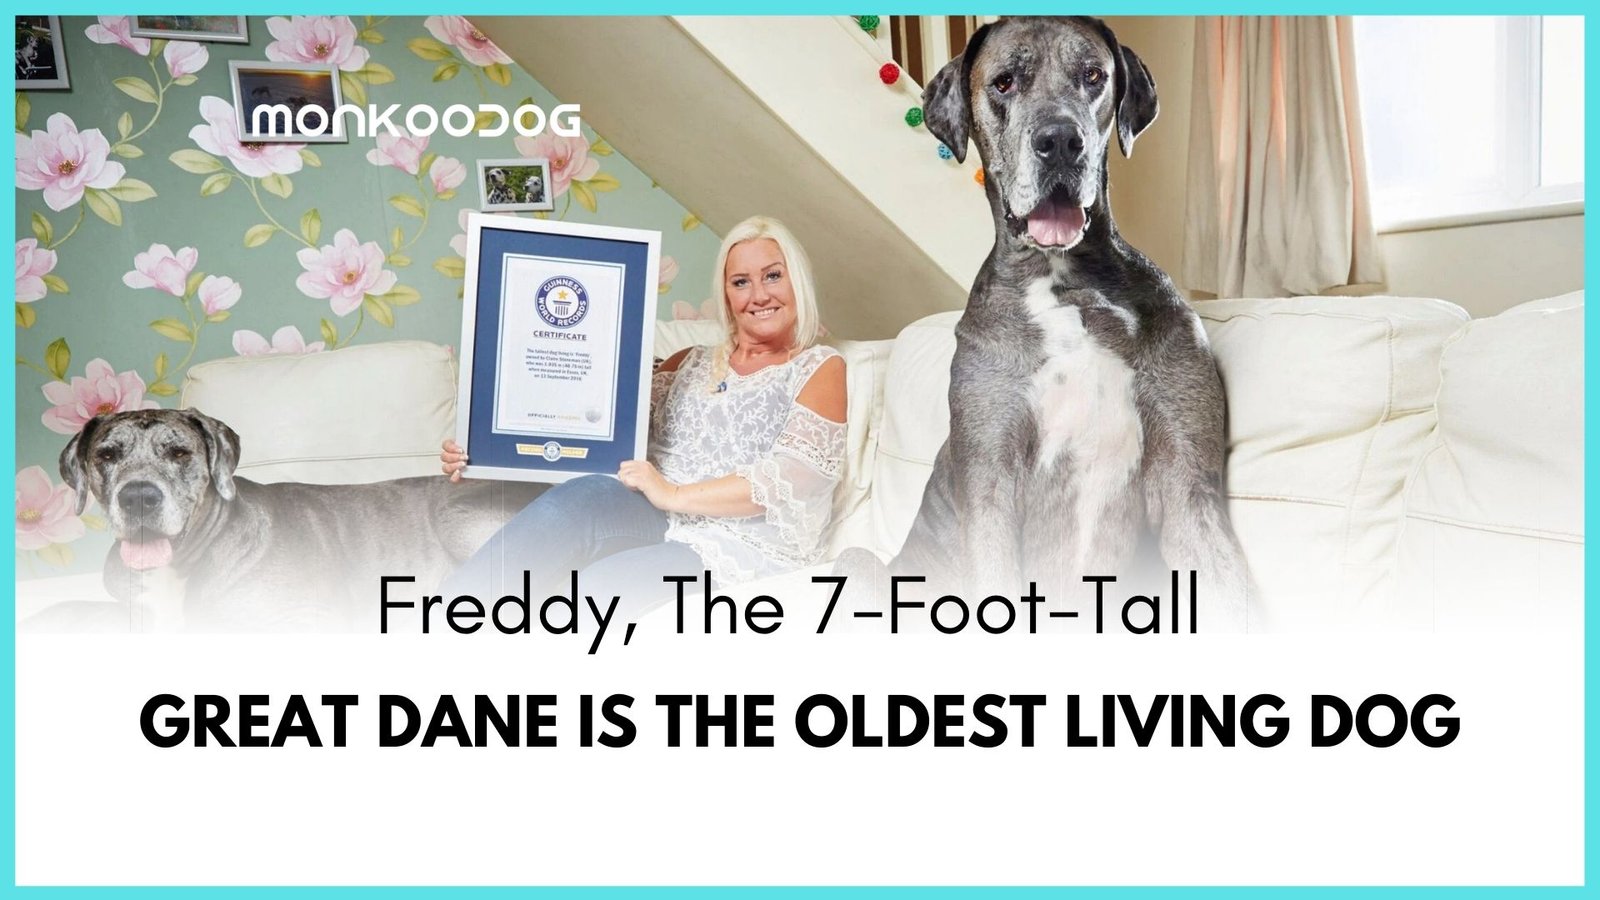 Freddy, the tallest dog is the oldest living dog in the world